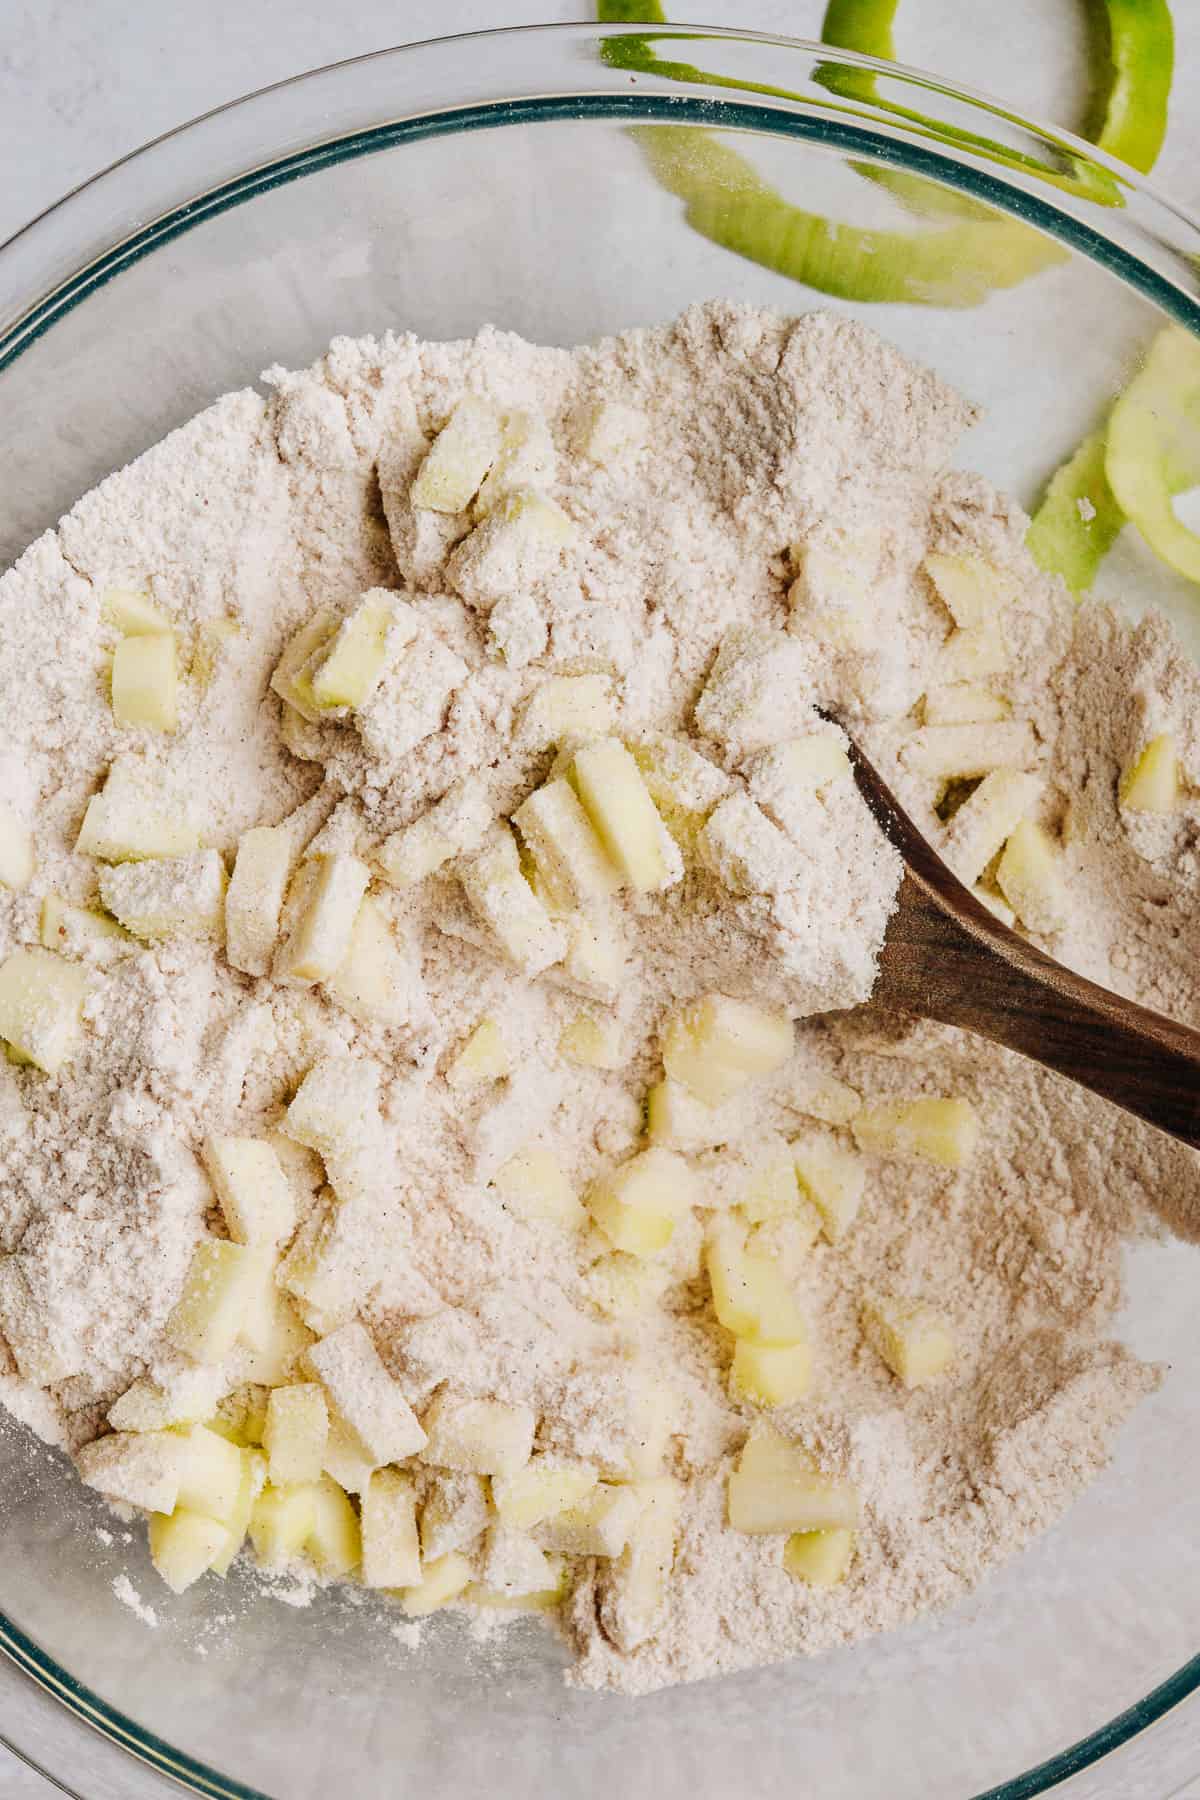 Chopped apples in flour mixture with wooden spoon.